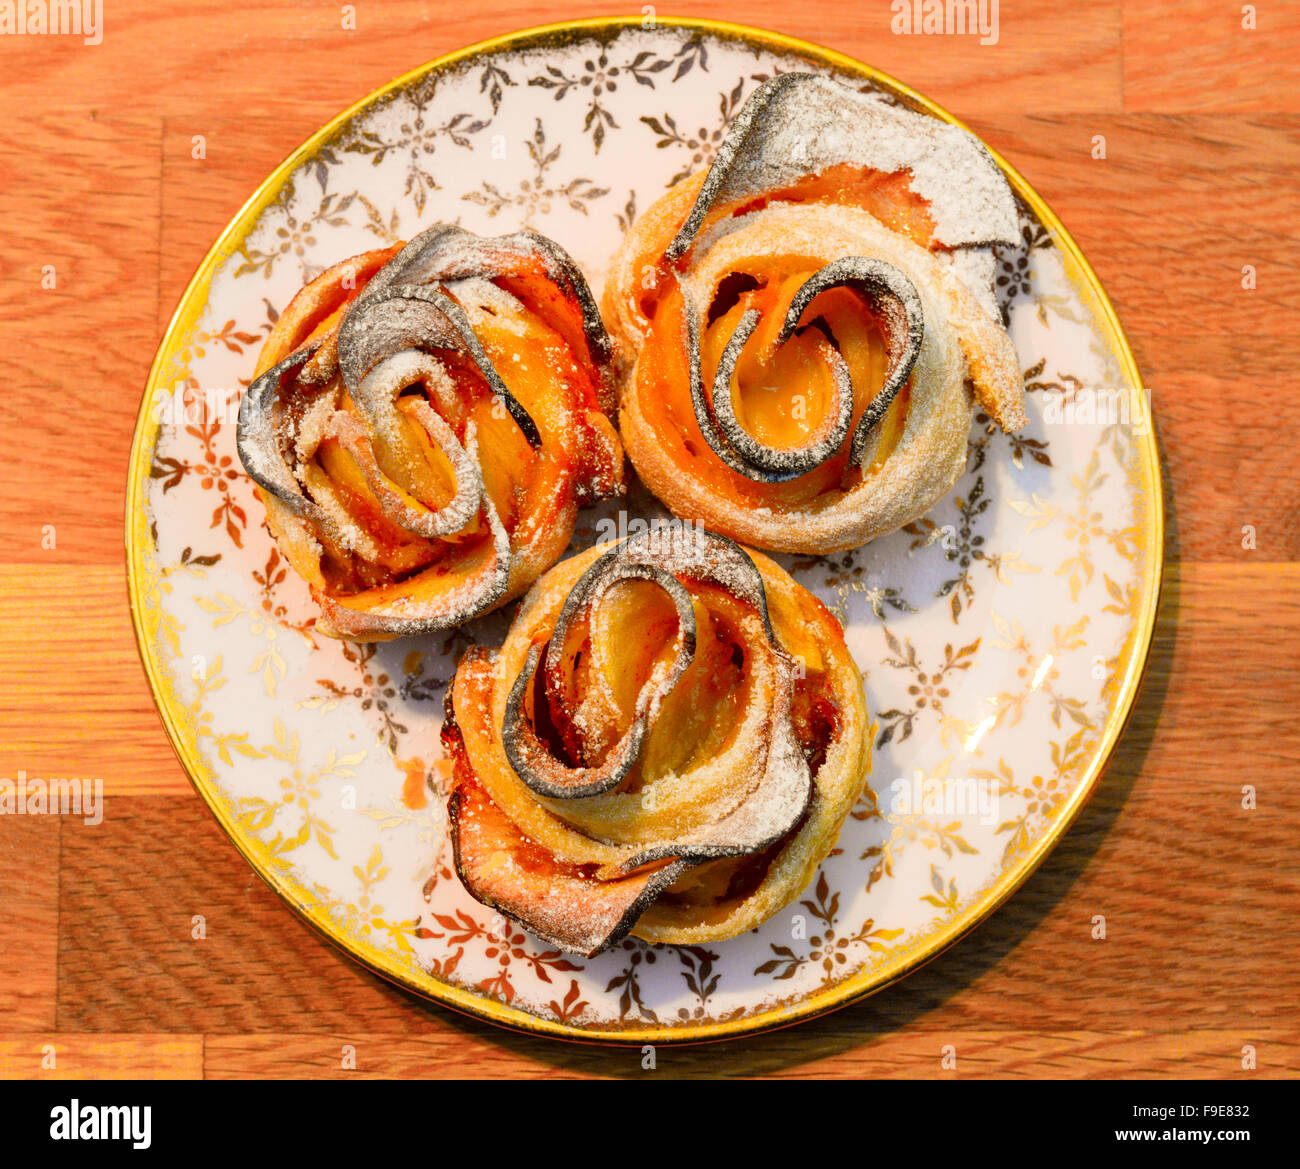 Three apple rose pies on a plate. Stock Photo